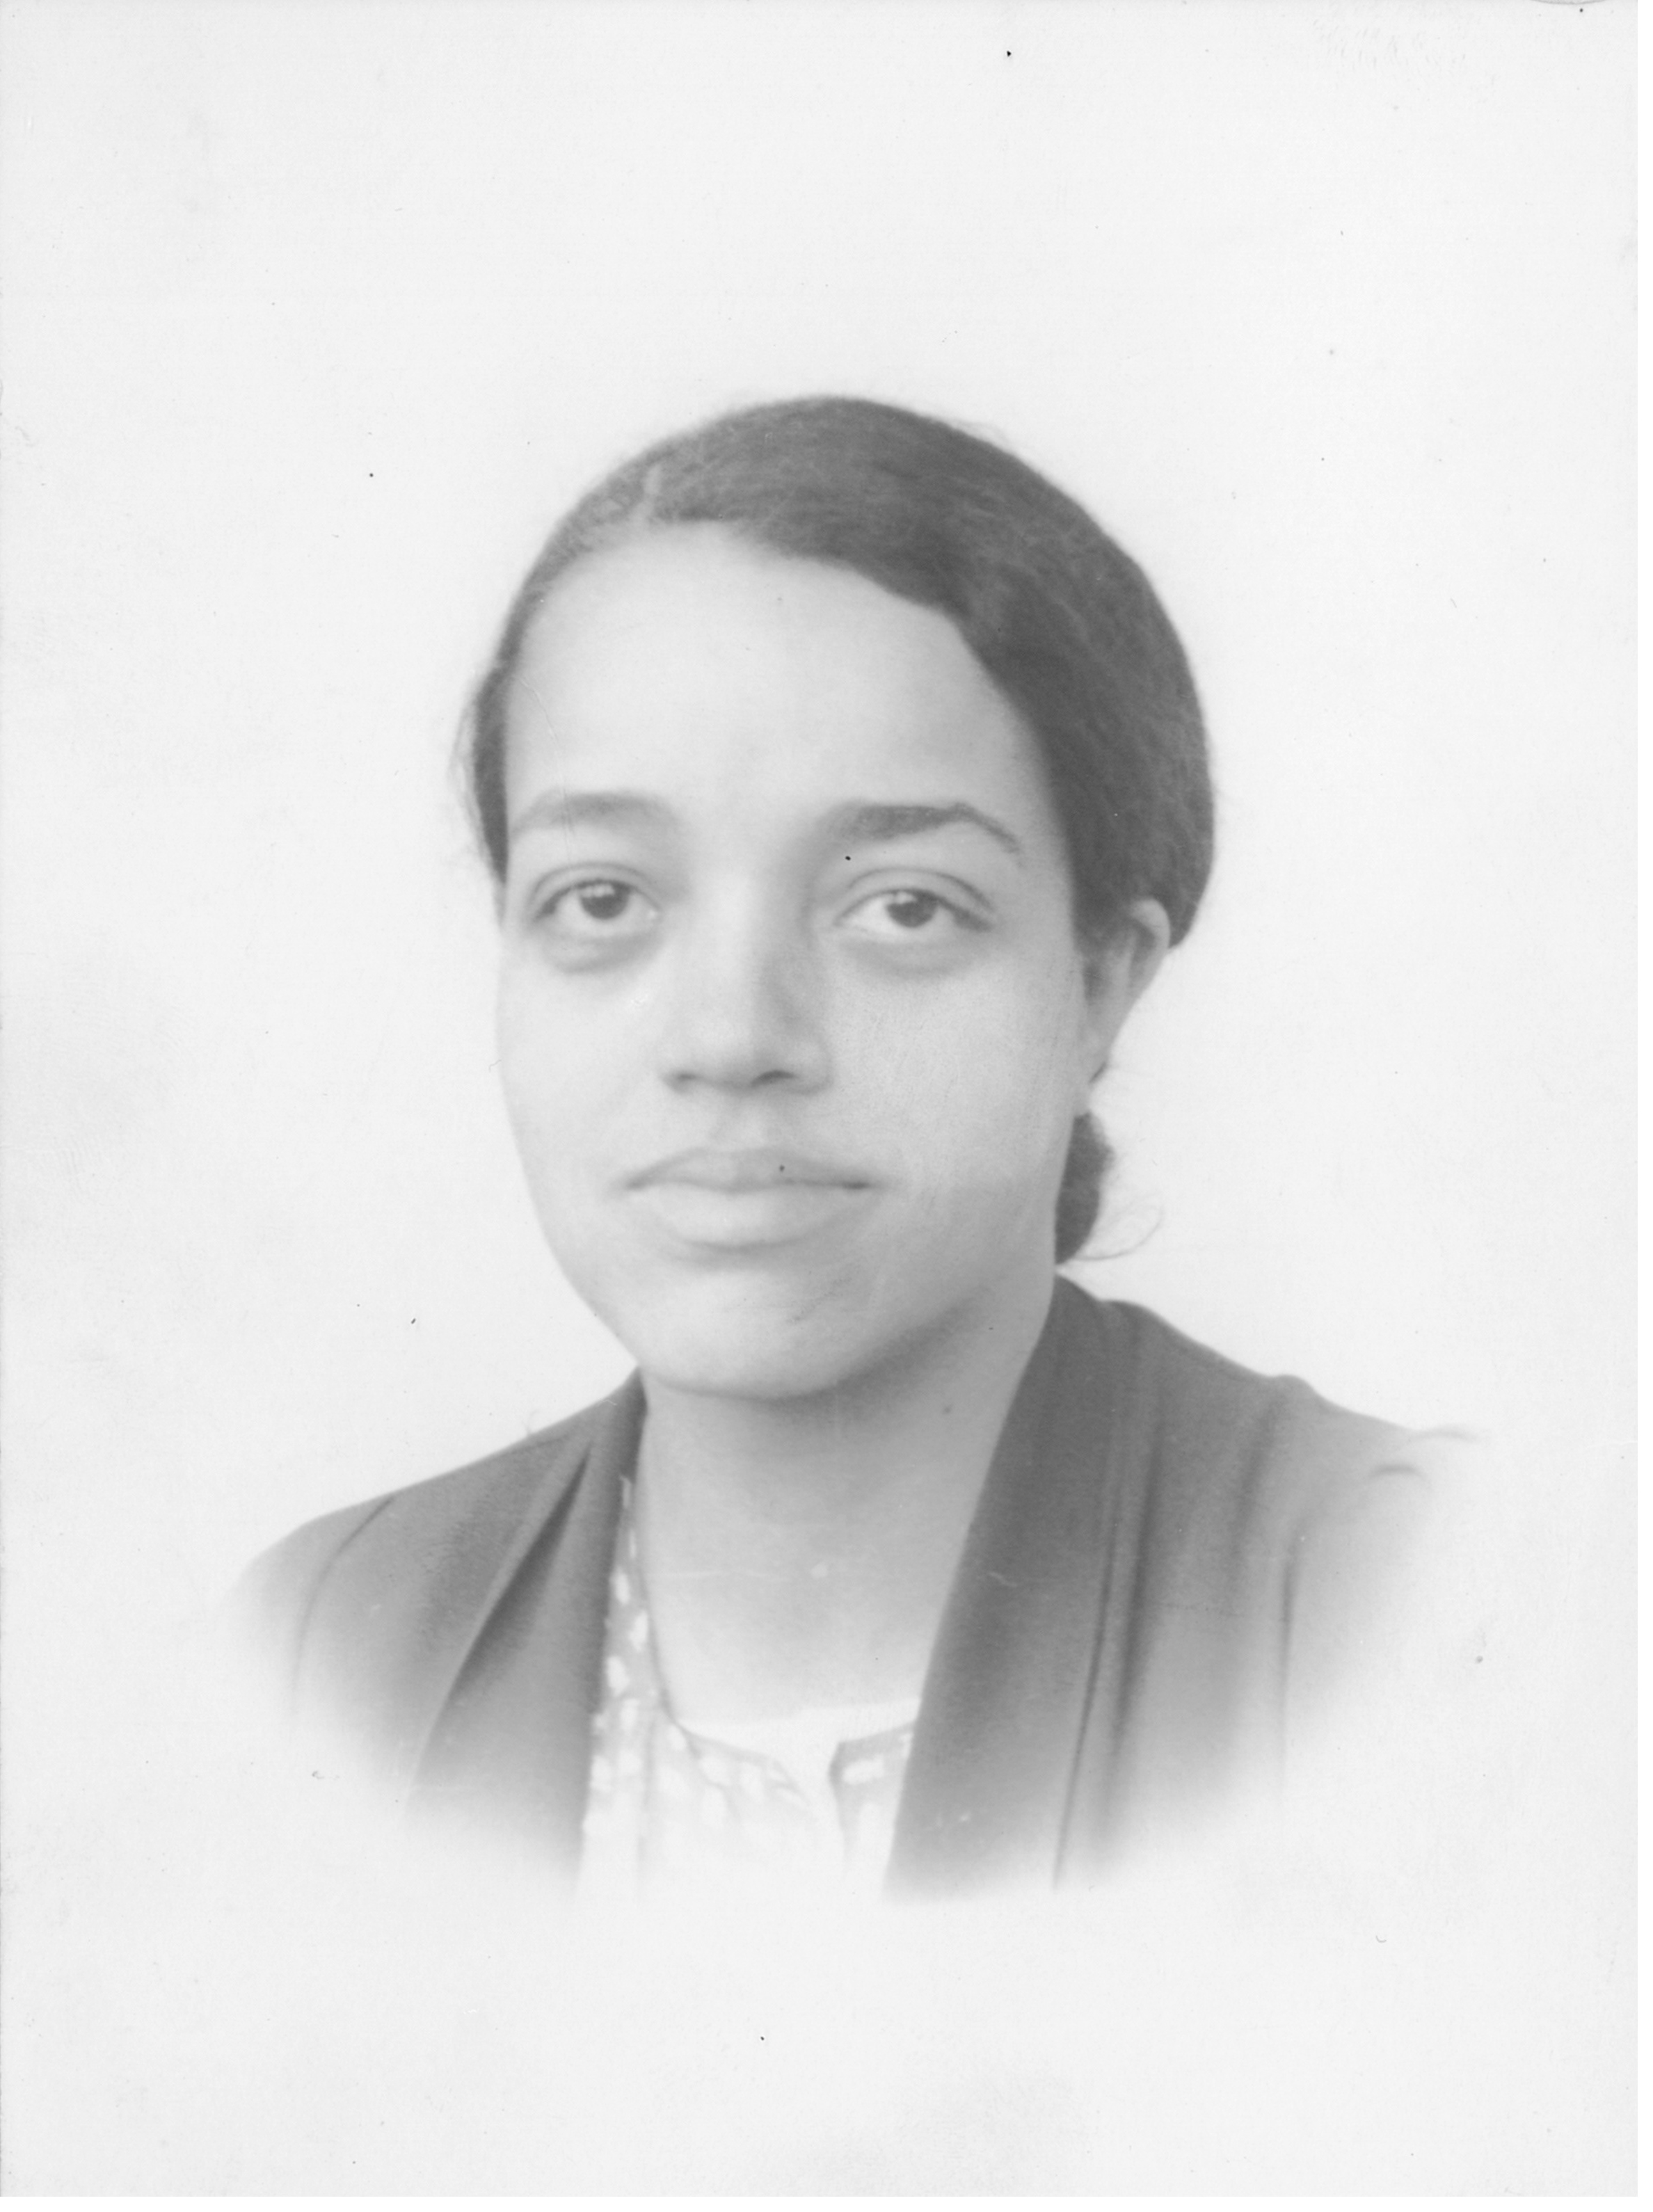 Dorothy Vaughan, the first black section lead at the NACA's Langley Research Center. She managed the all-black West Area Computing Unit for nearly a decade. Credit: The Family of Dorothy J. Vaughan